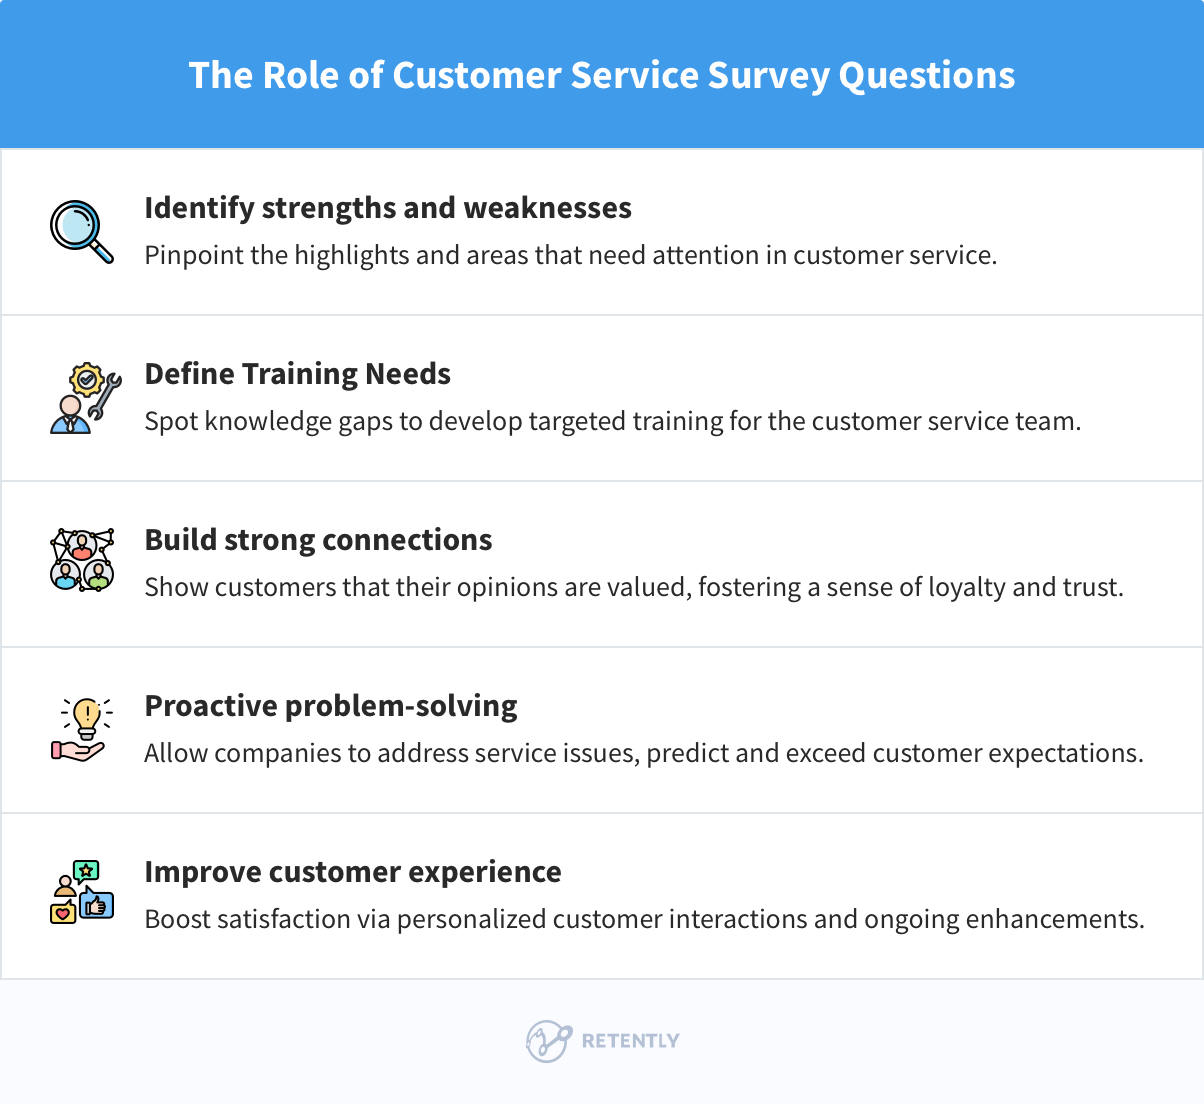 The Role of Customer Service Survey Questions